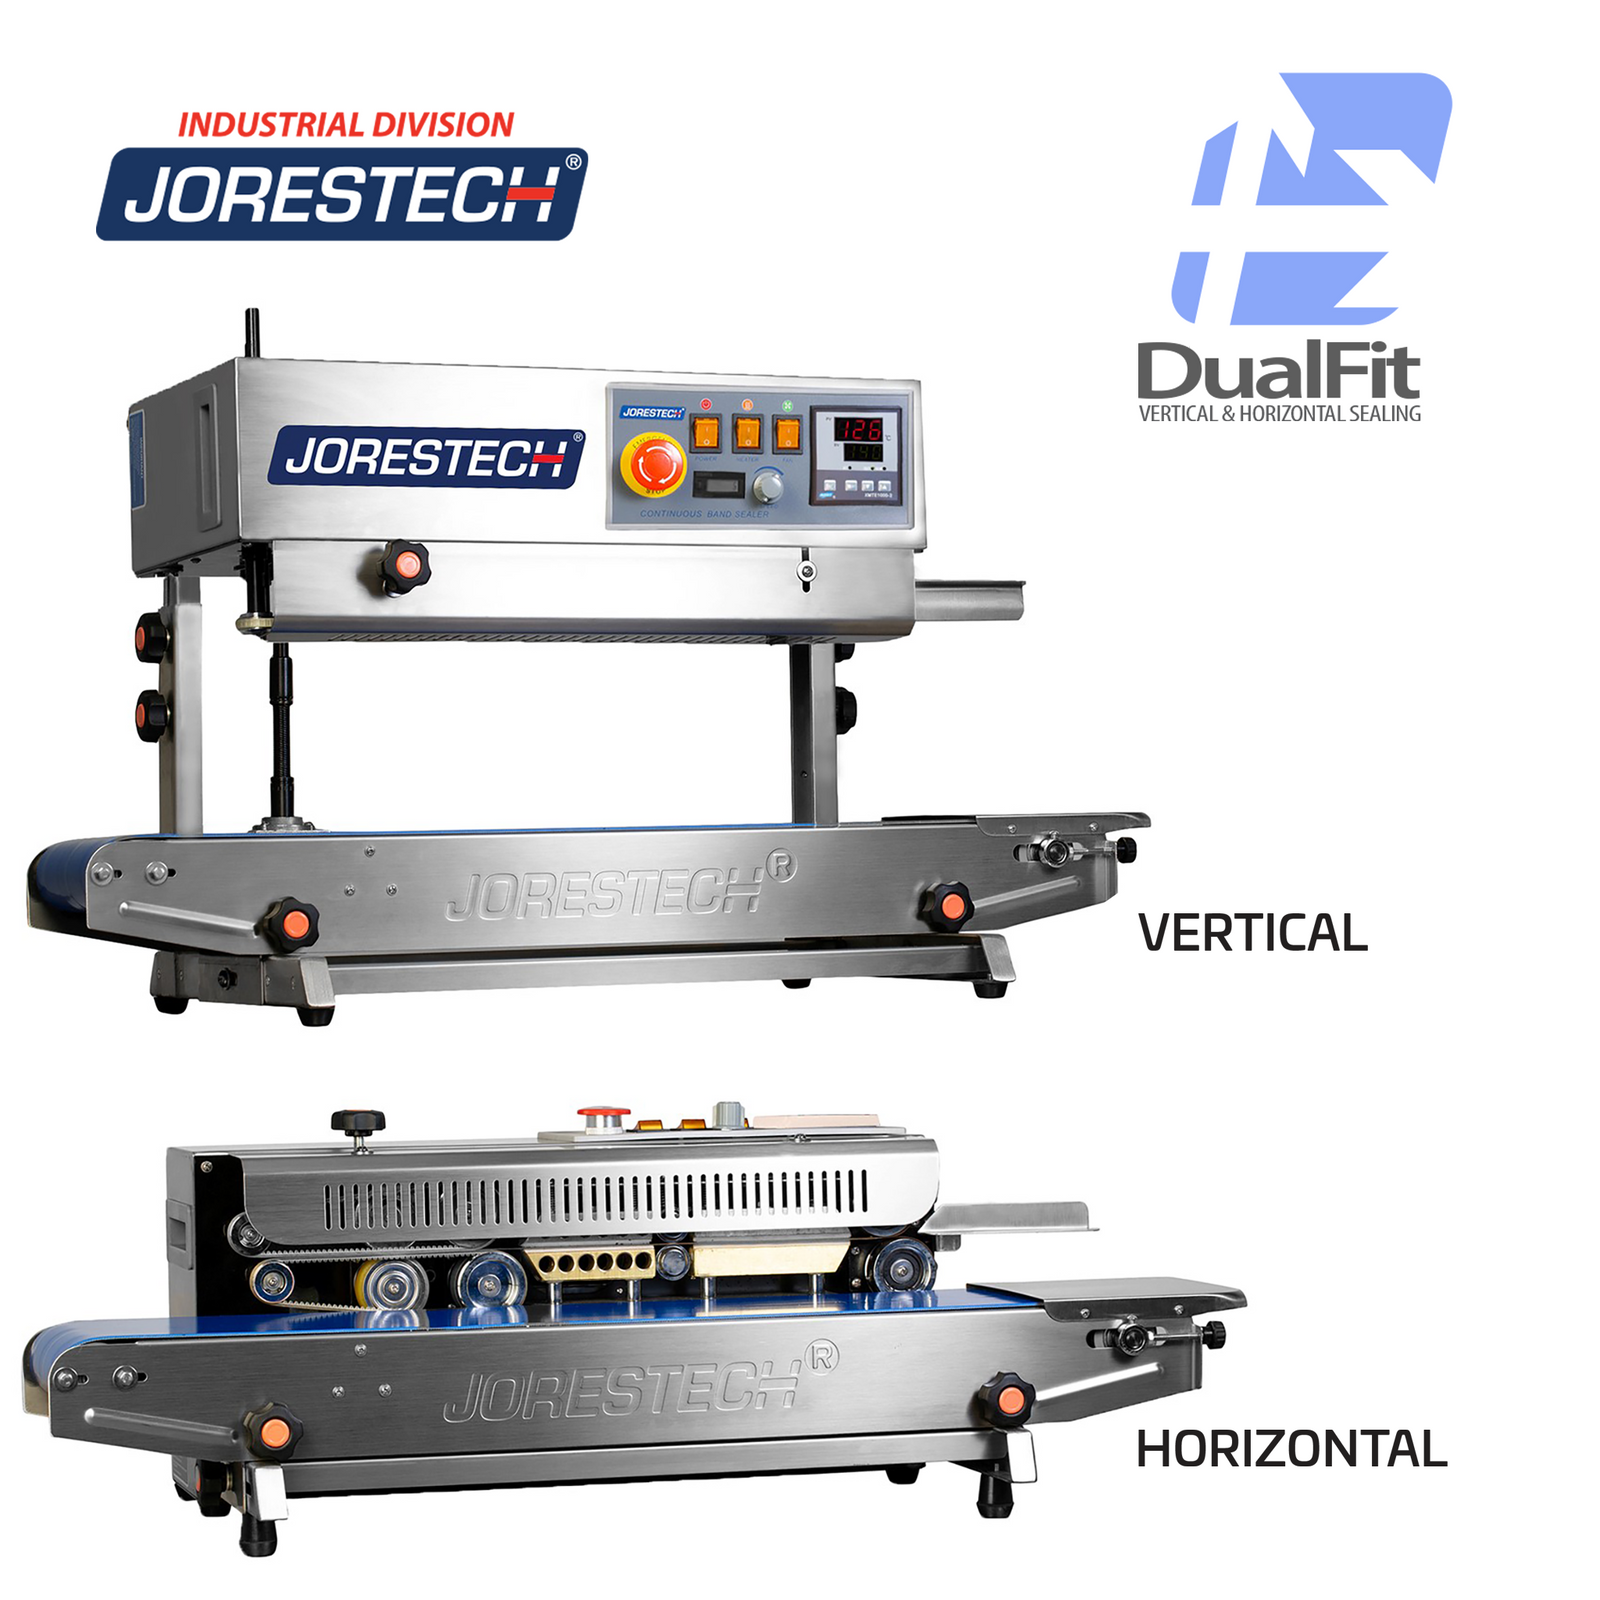 Shows the stainless steel digital continuous band sealer for vertical and horizontal applications